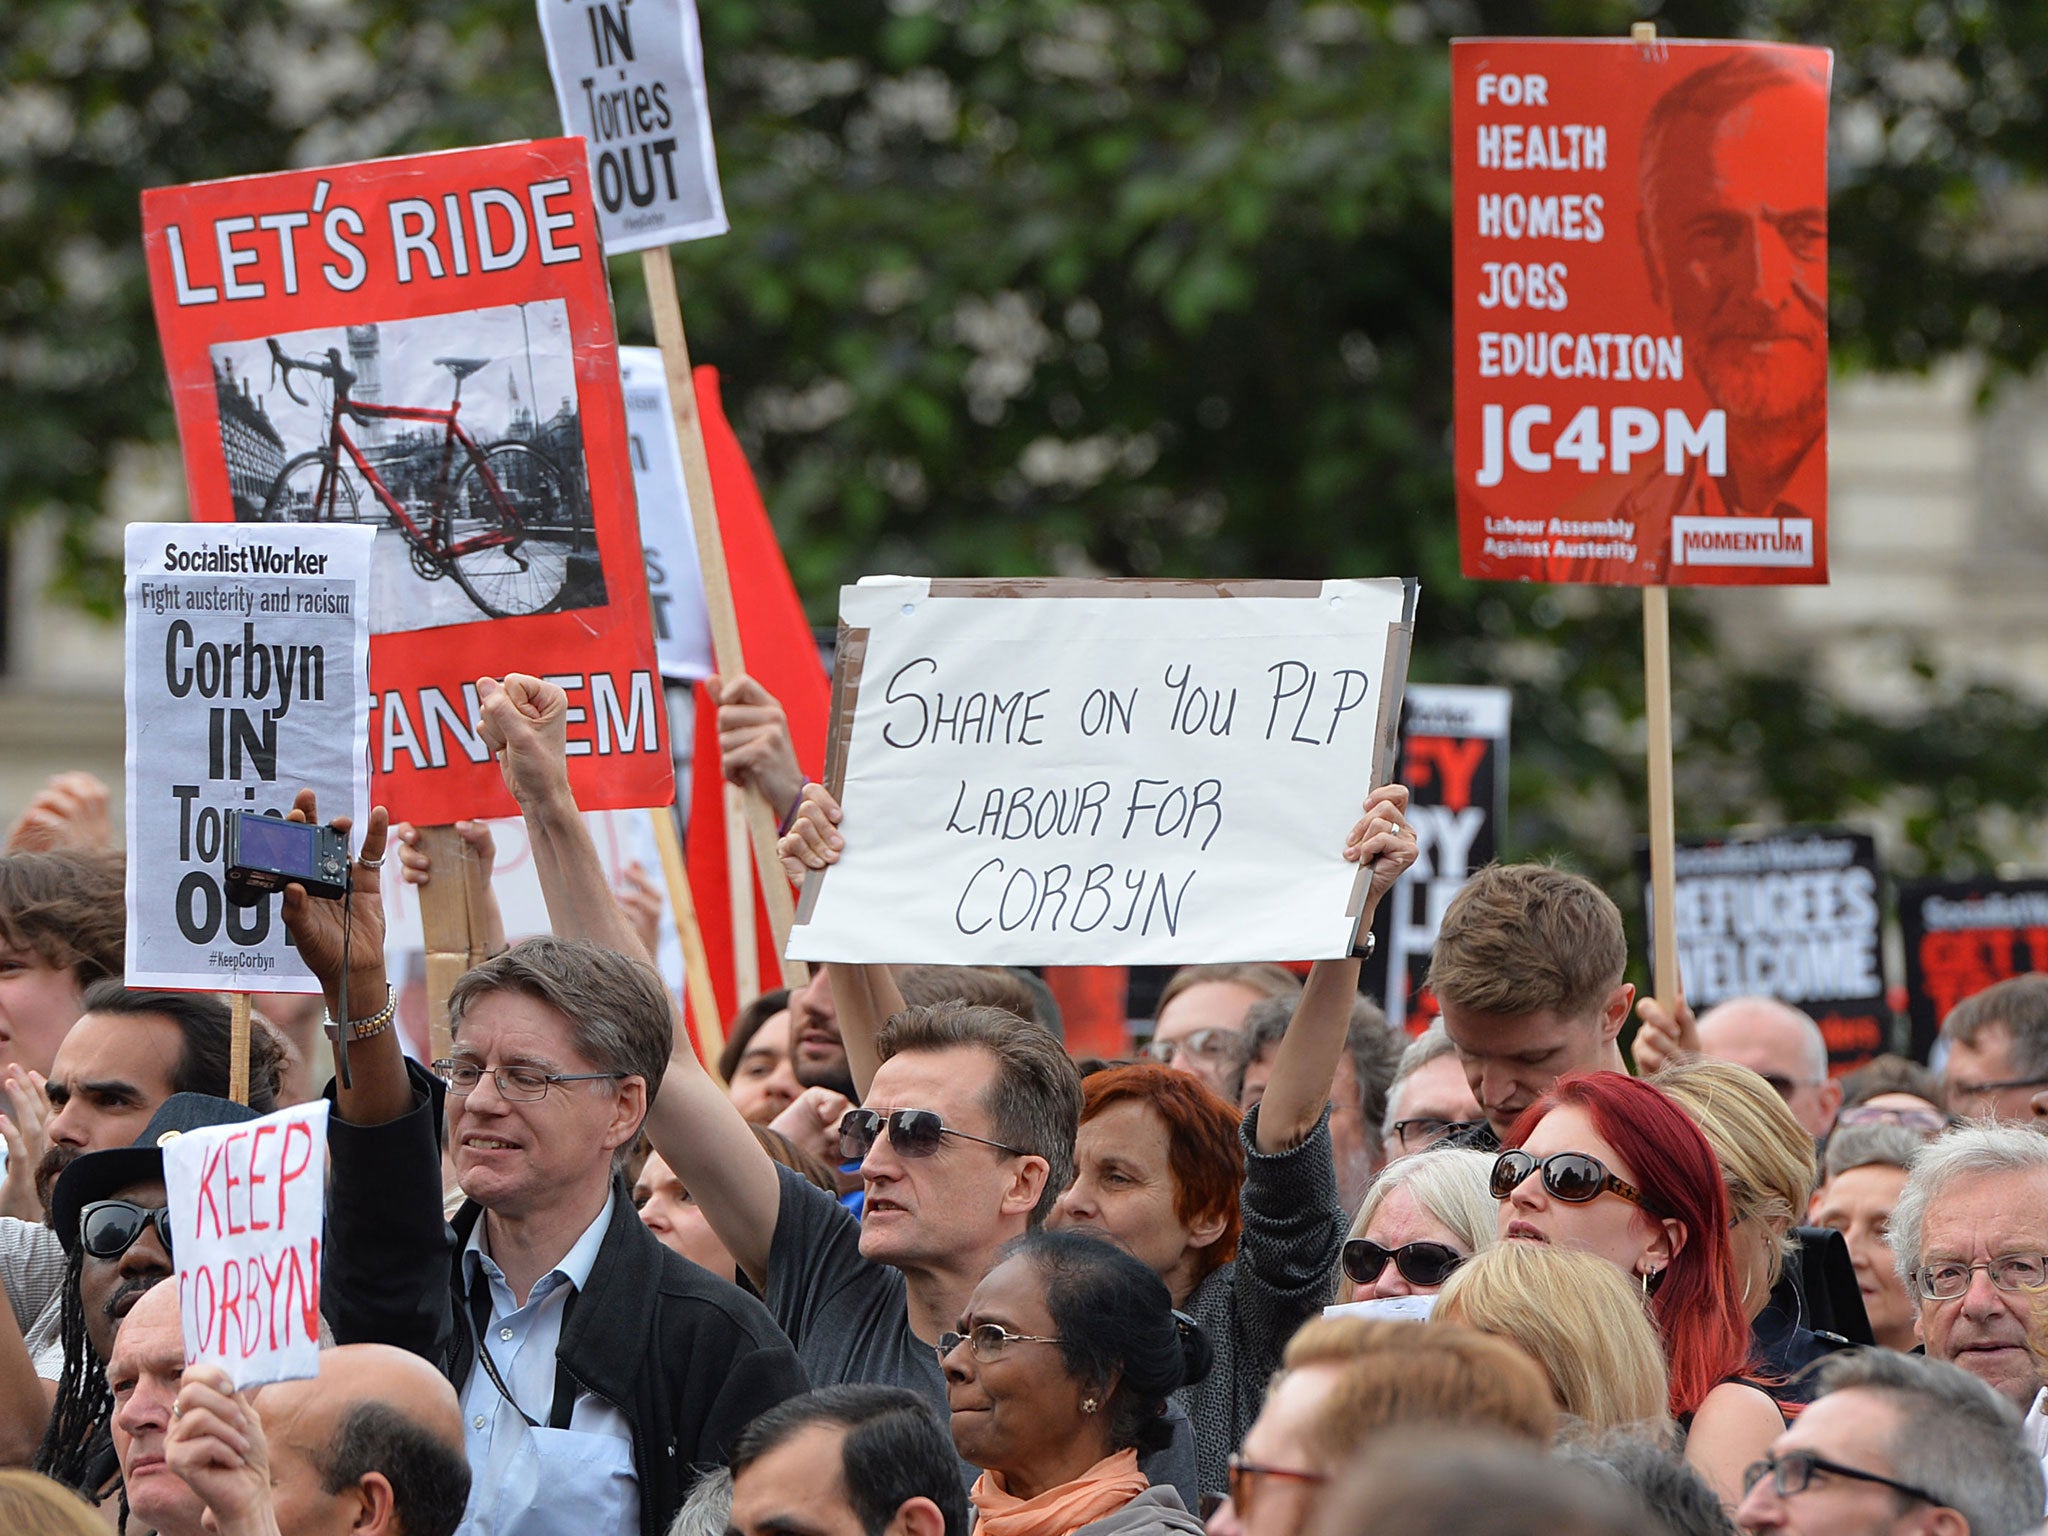 Corbyn supporters gathered in Parliament Square while the Labour Party met to debate a no confidence motion